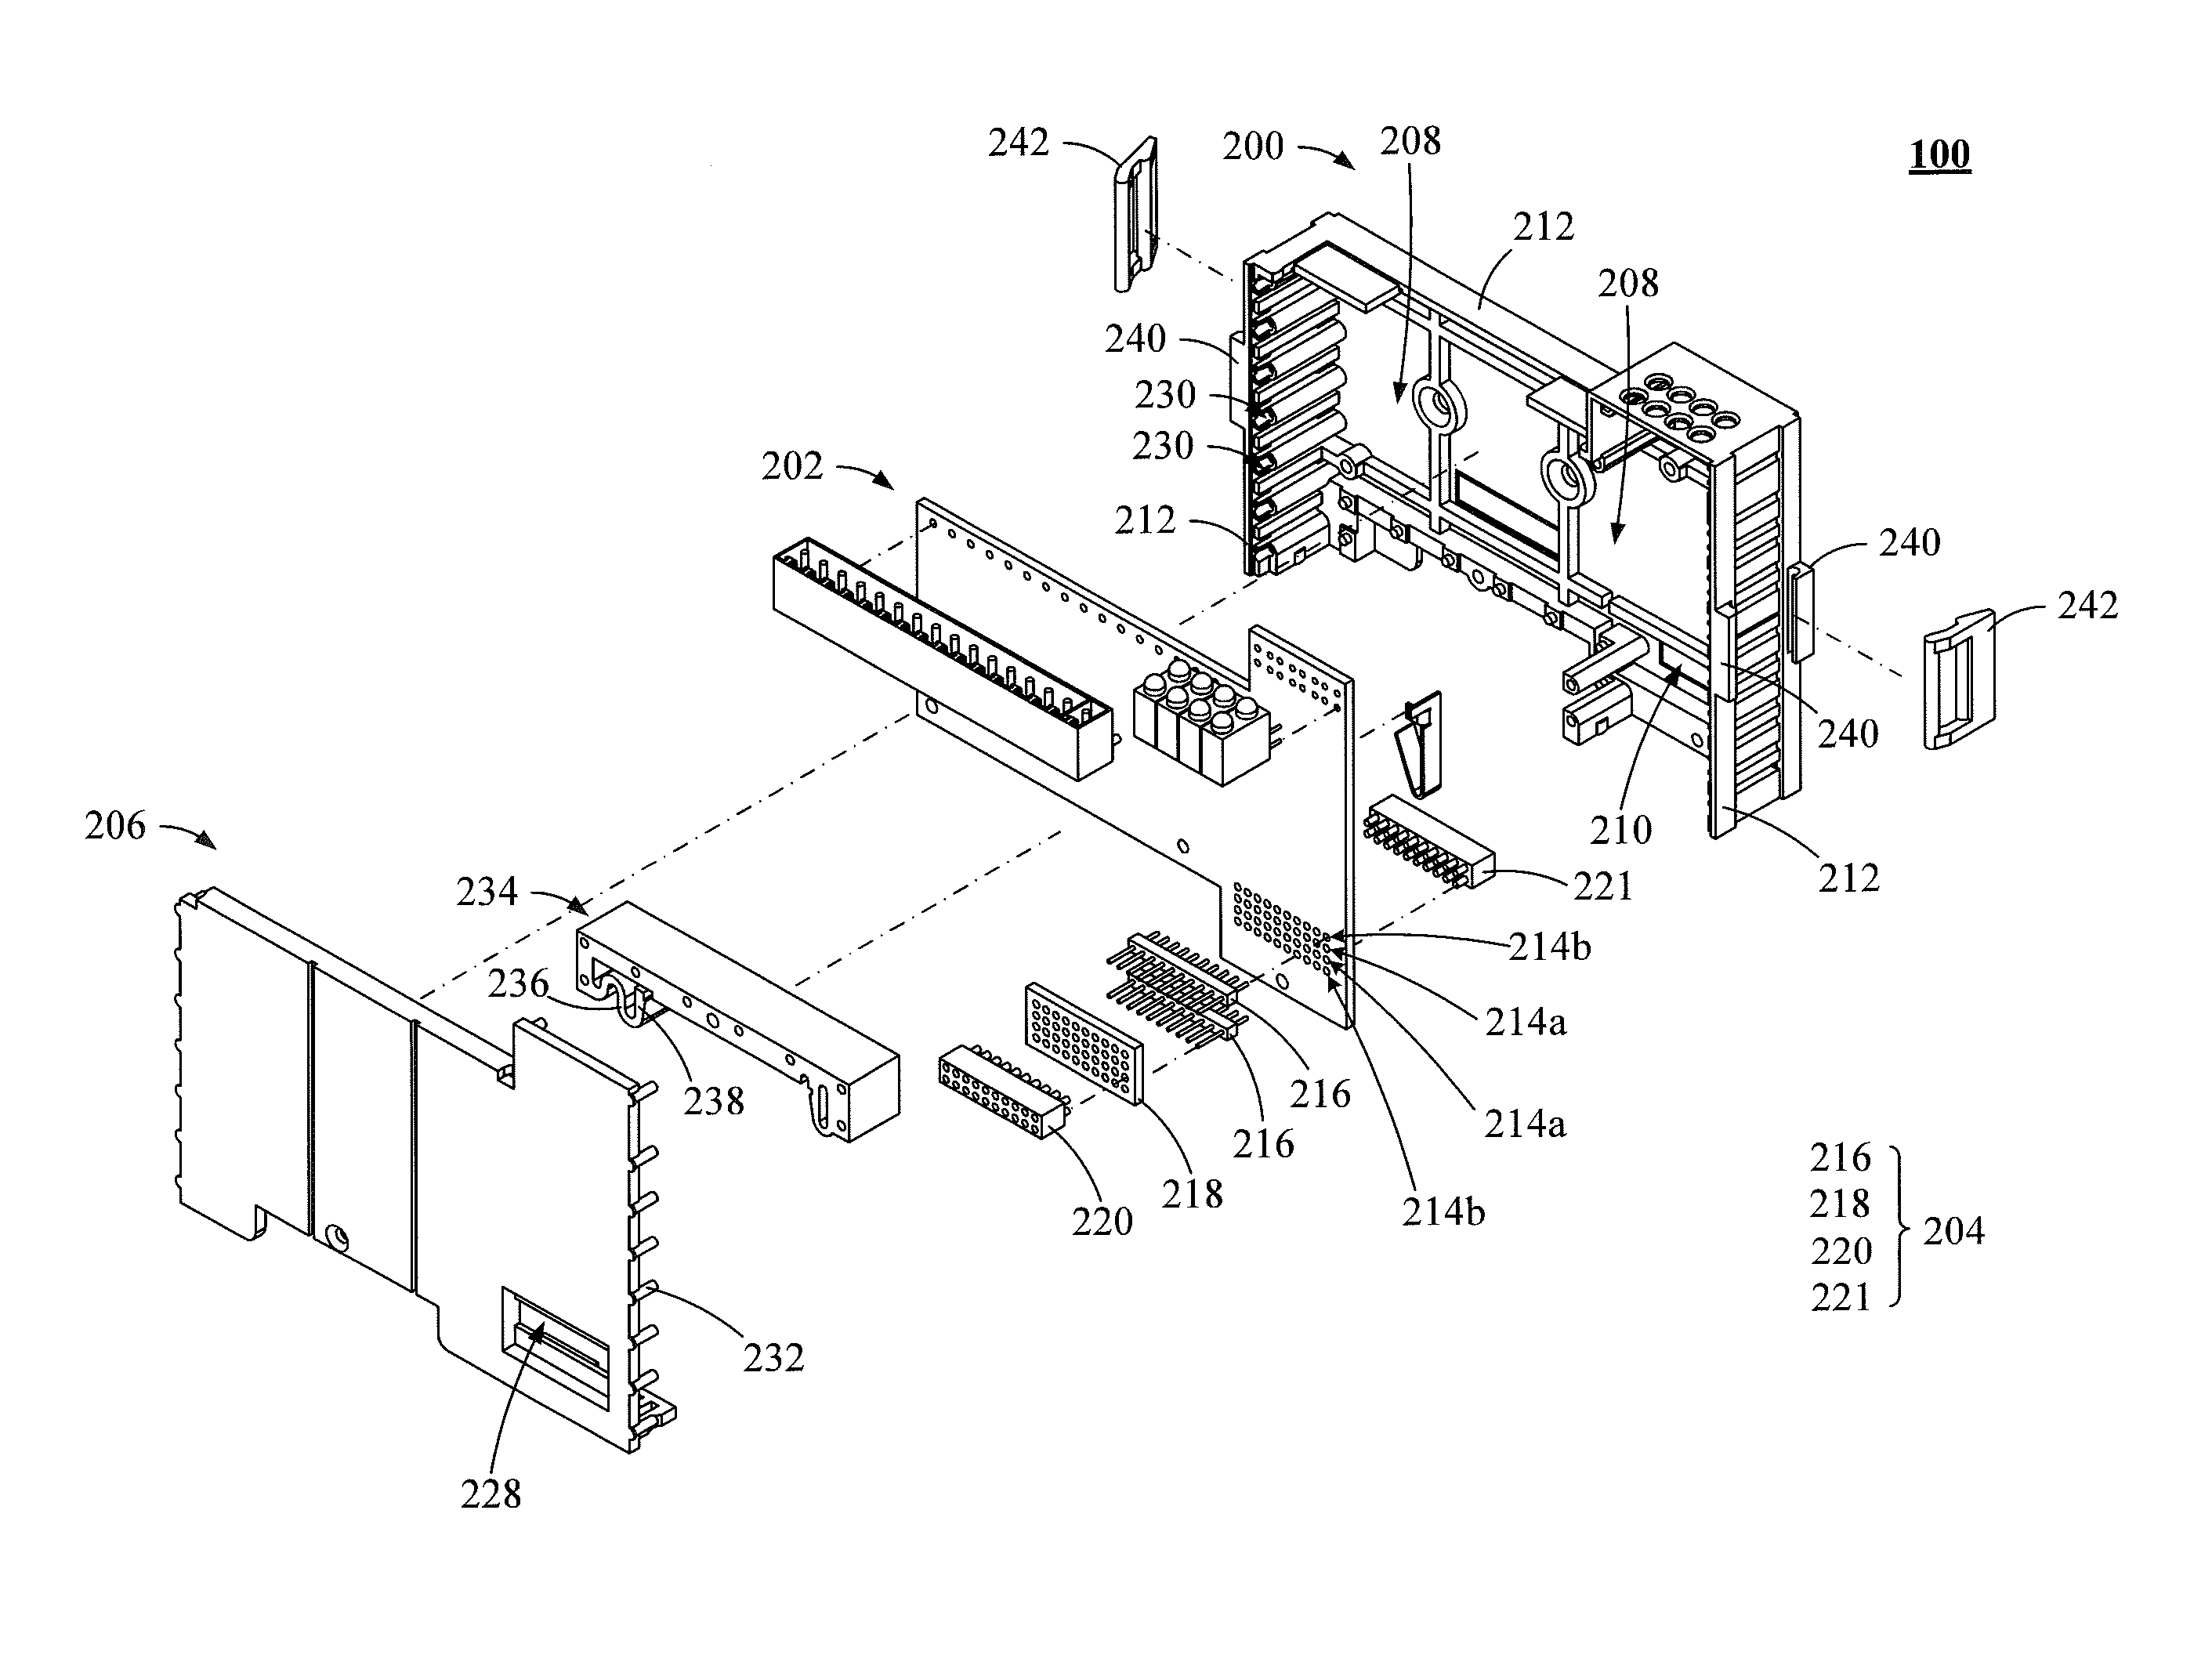 Communication structure with connecting assembly